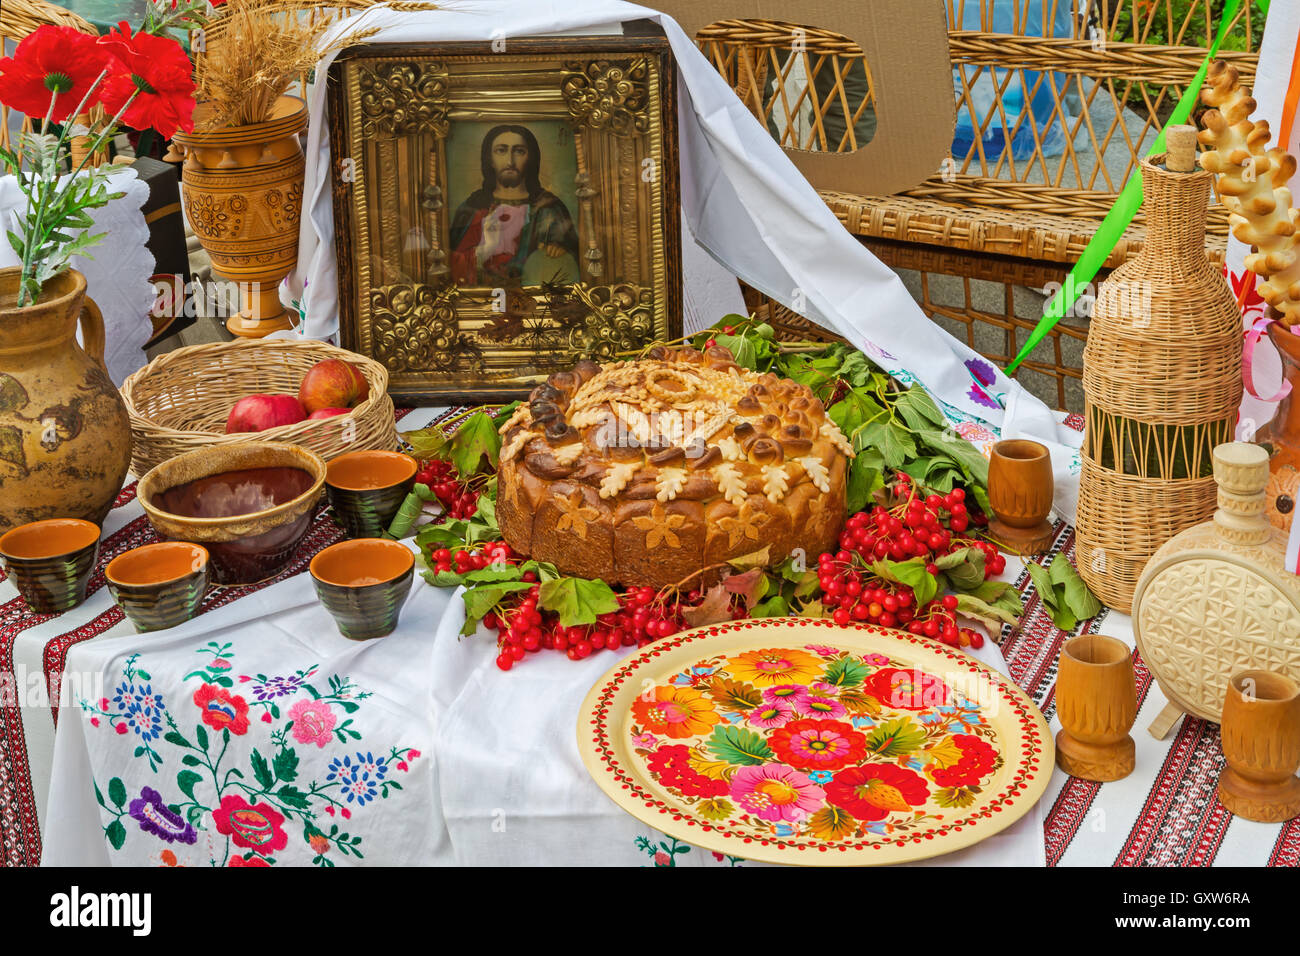 European people's table setting in national Slavic style Stock Photo